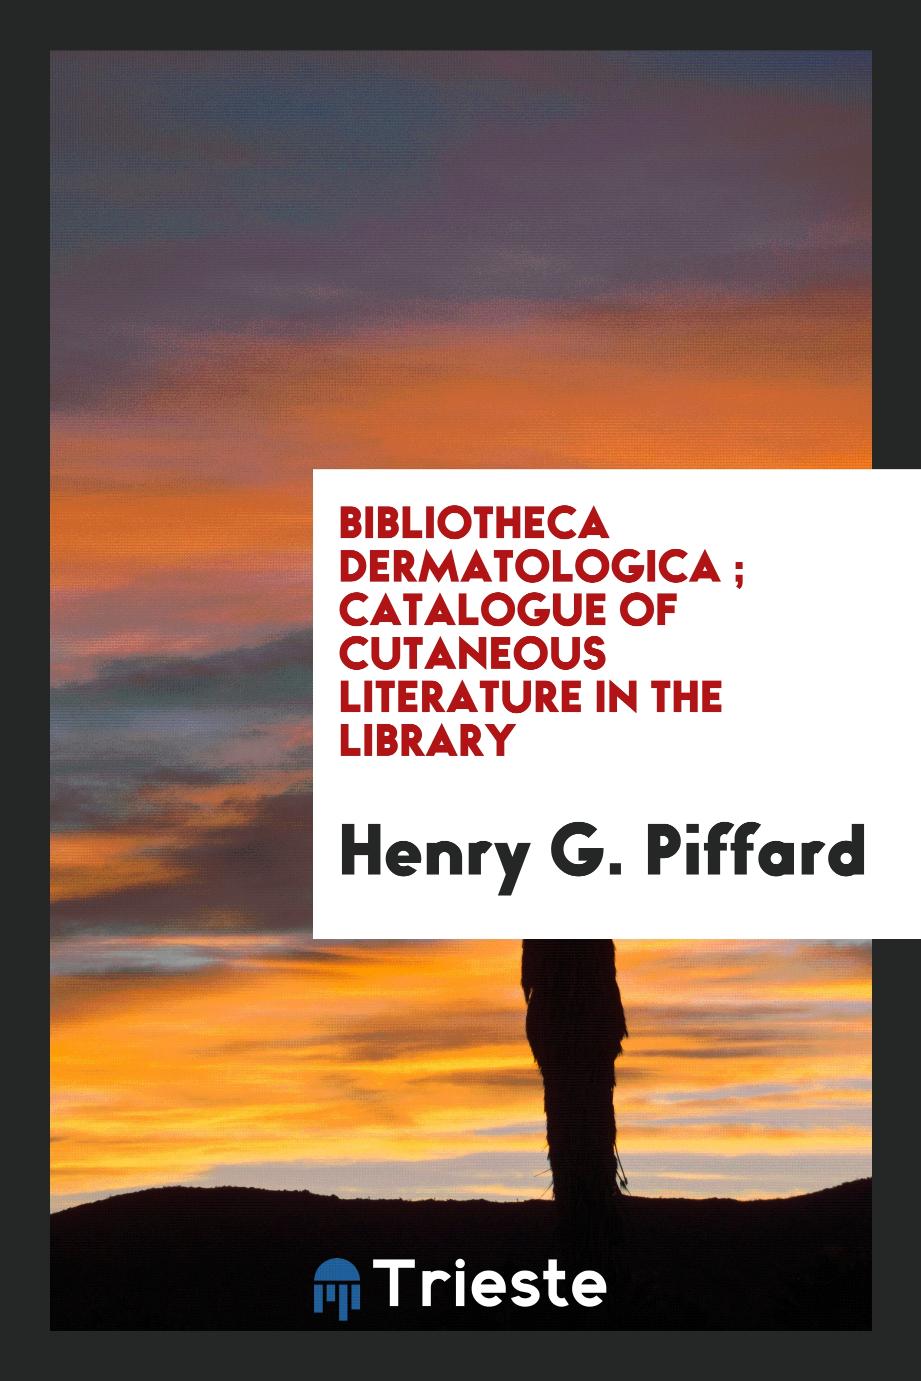 Bibliotheca dermatologica ; catalogue of cutaneous literature in the library